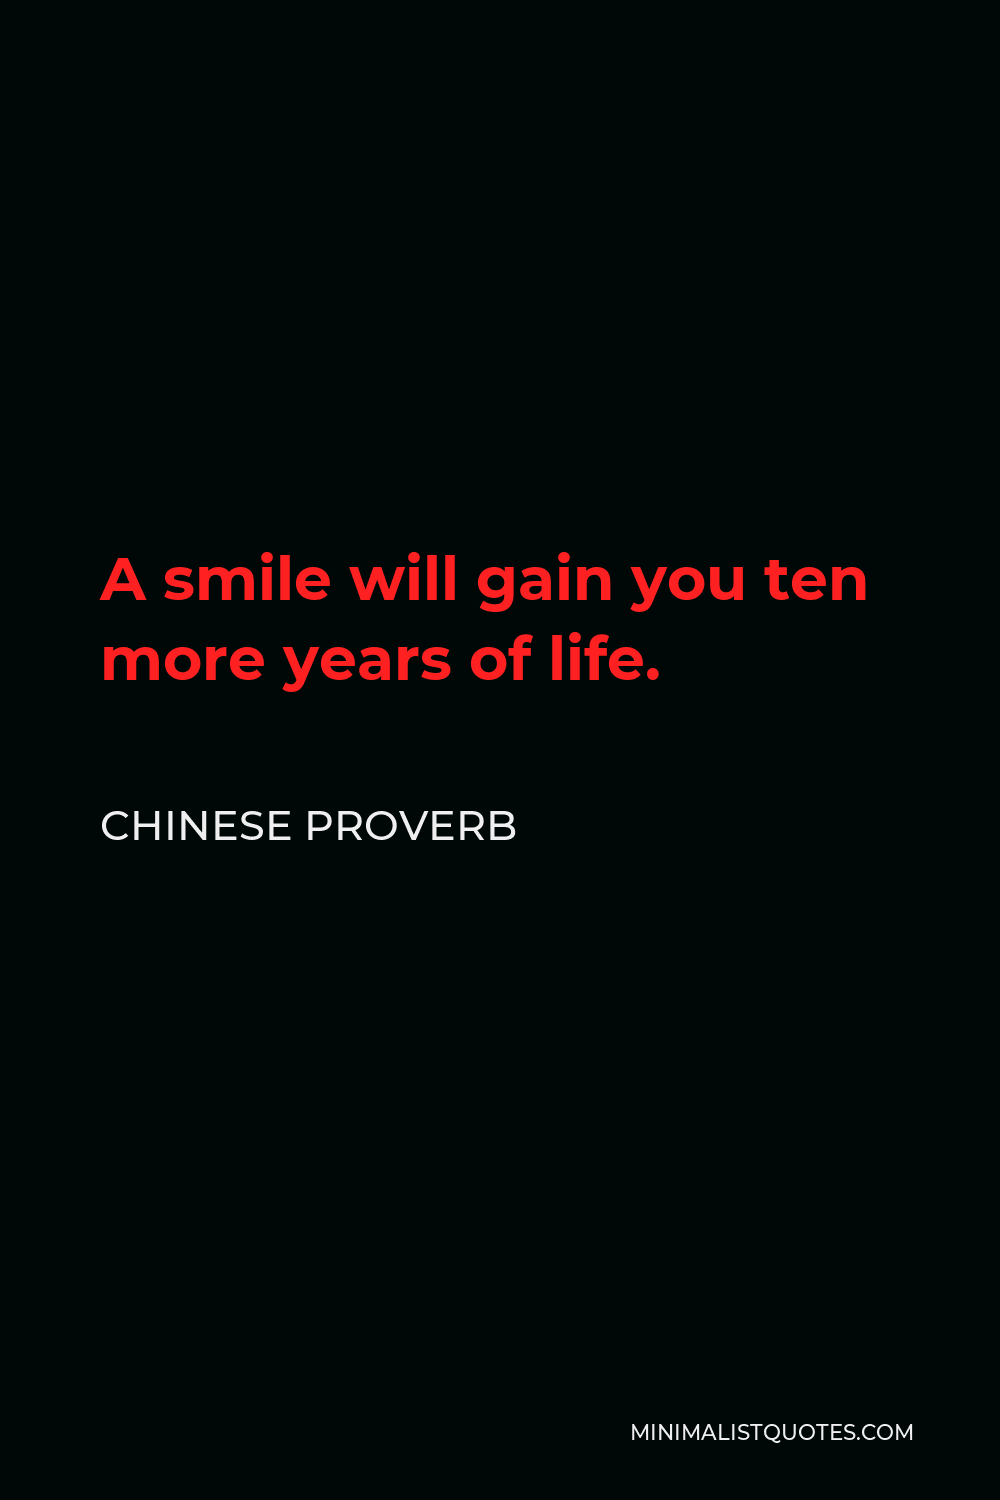 Chinese Proverb Quote - A smile will gain you ten more years of life.